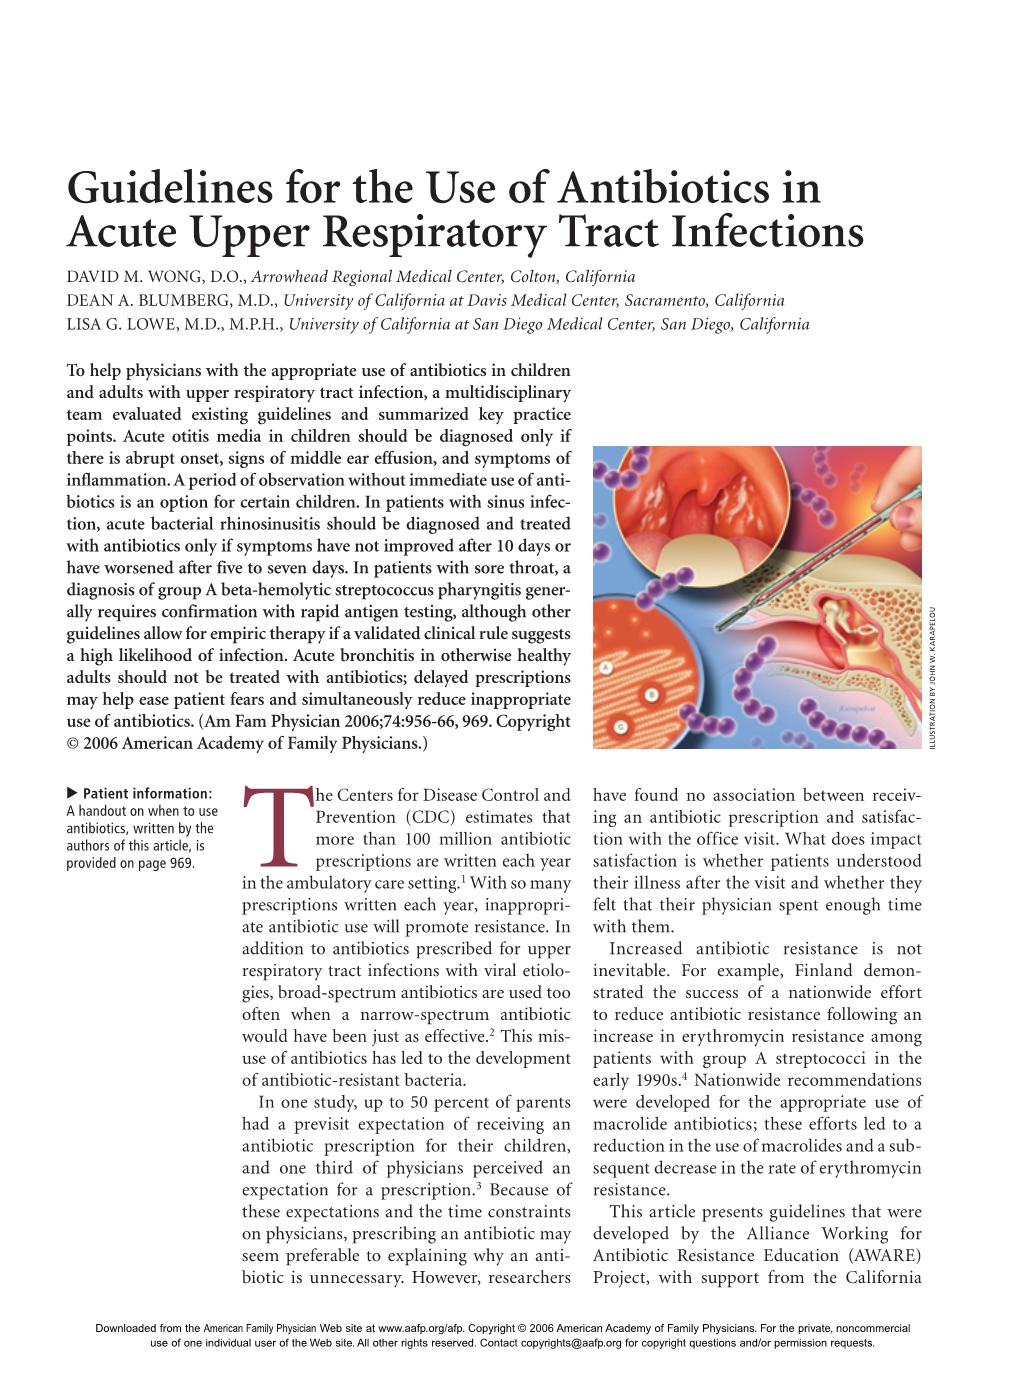 Guidelines for the Use of Antibiotics in Acute Upper Respiratory Tract Infections DAVID M